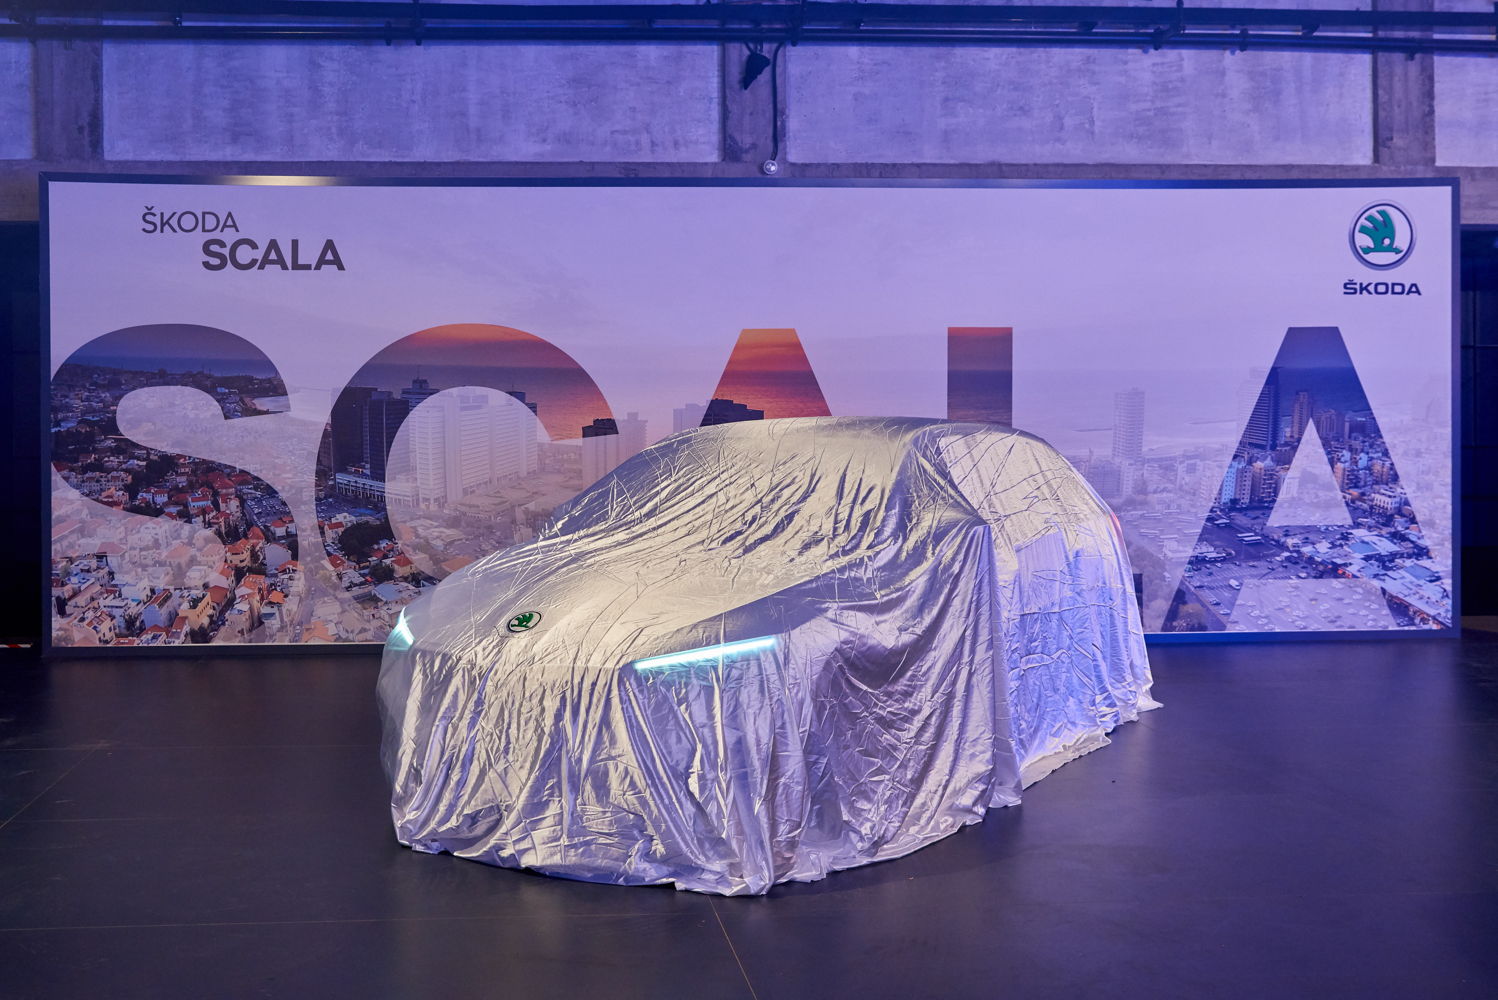 ŠKODA is the most successful European car manufacturer in Israel and is represented in the hotspot for IT start-ups by ŠKODA AUTO DigiLab Israel in Tel Aviv, making Israel the perfect location to host the world premiere of the new ŠKODA SCALA compact model this Thursday.